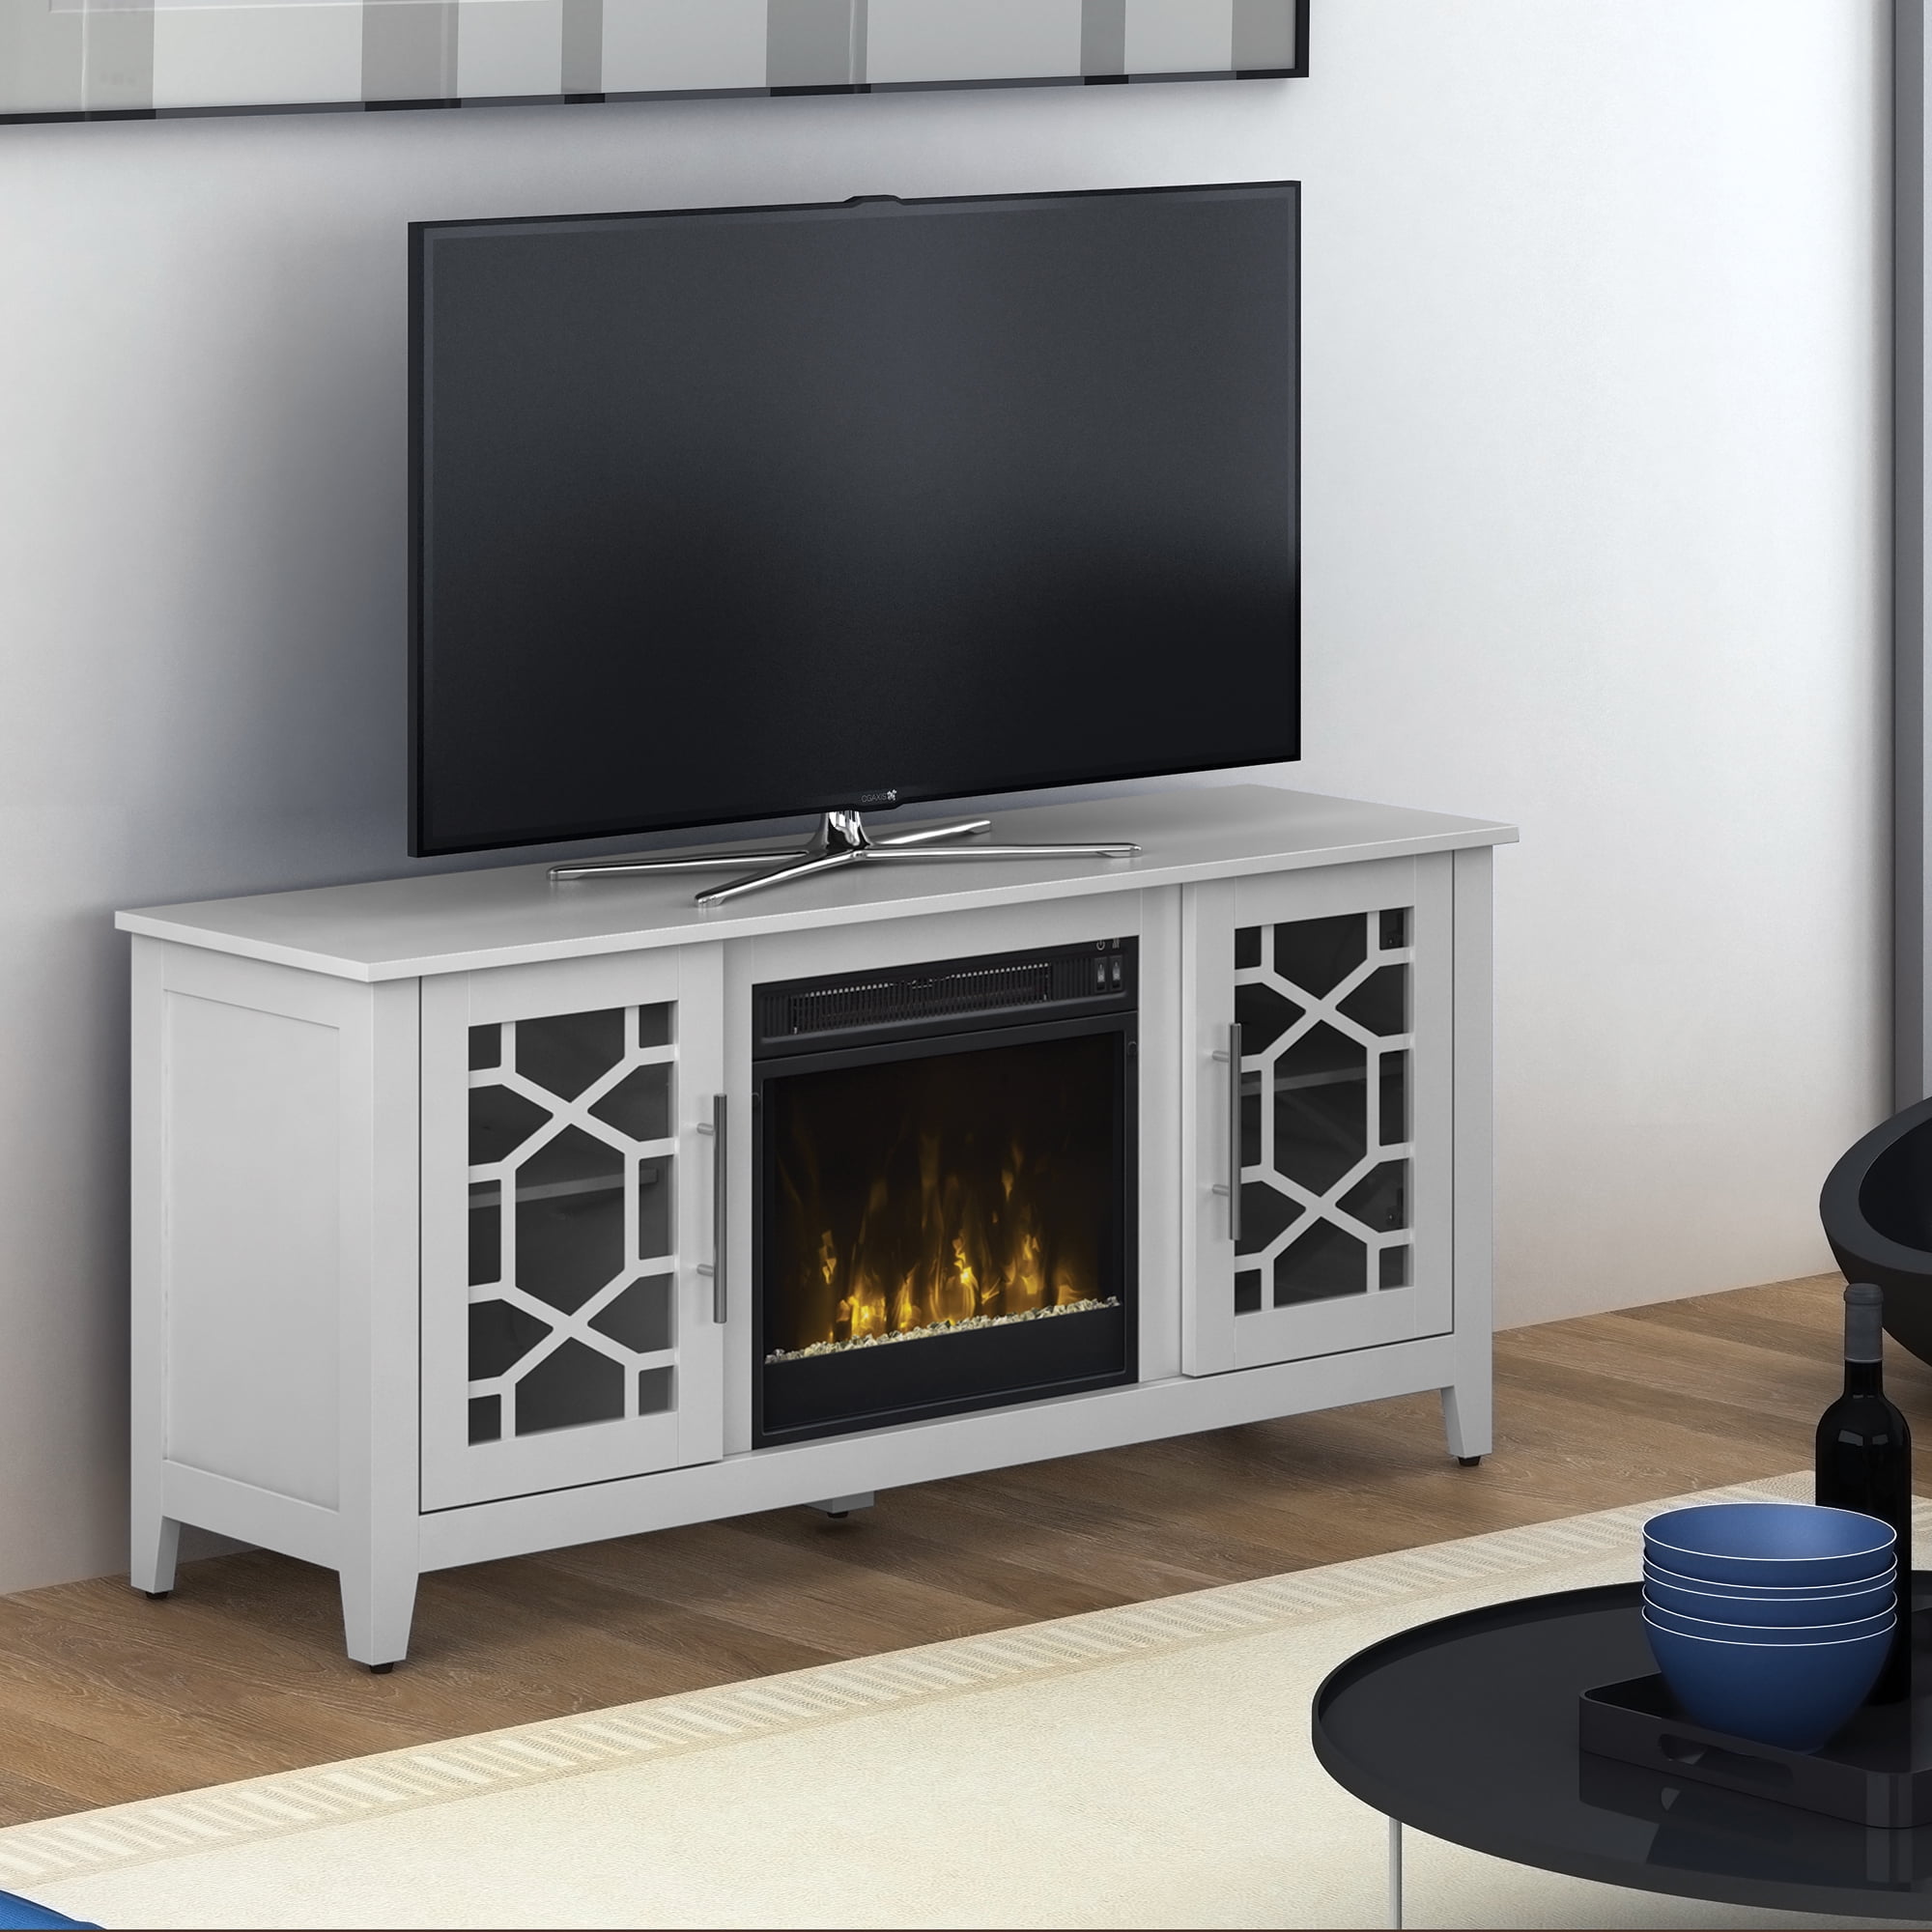 Clarion Tv Stand For Tvs Up To 60 With, Classic Flame Clarion 60 In Tv Stand With Electric Fireplace